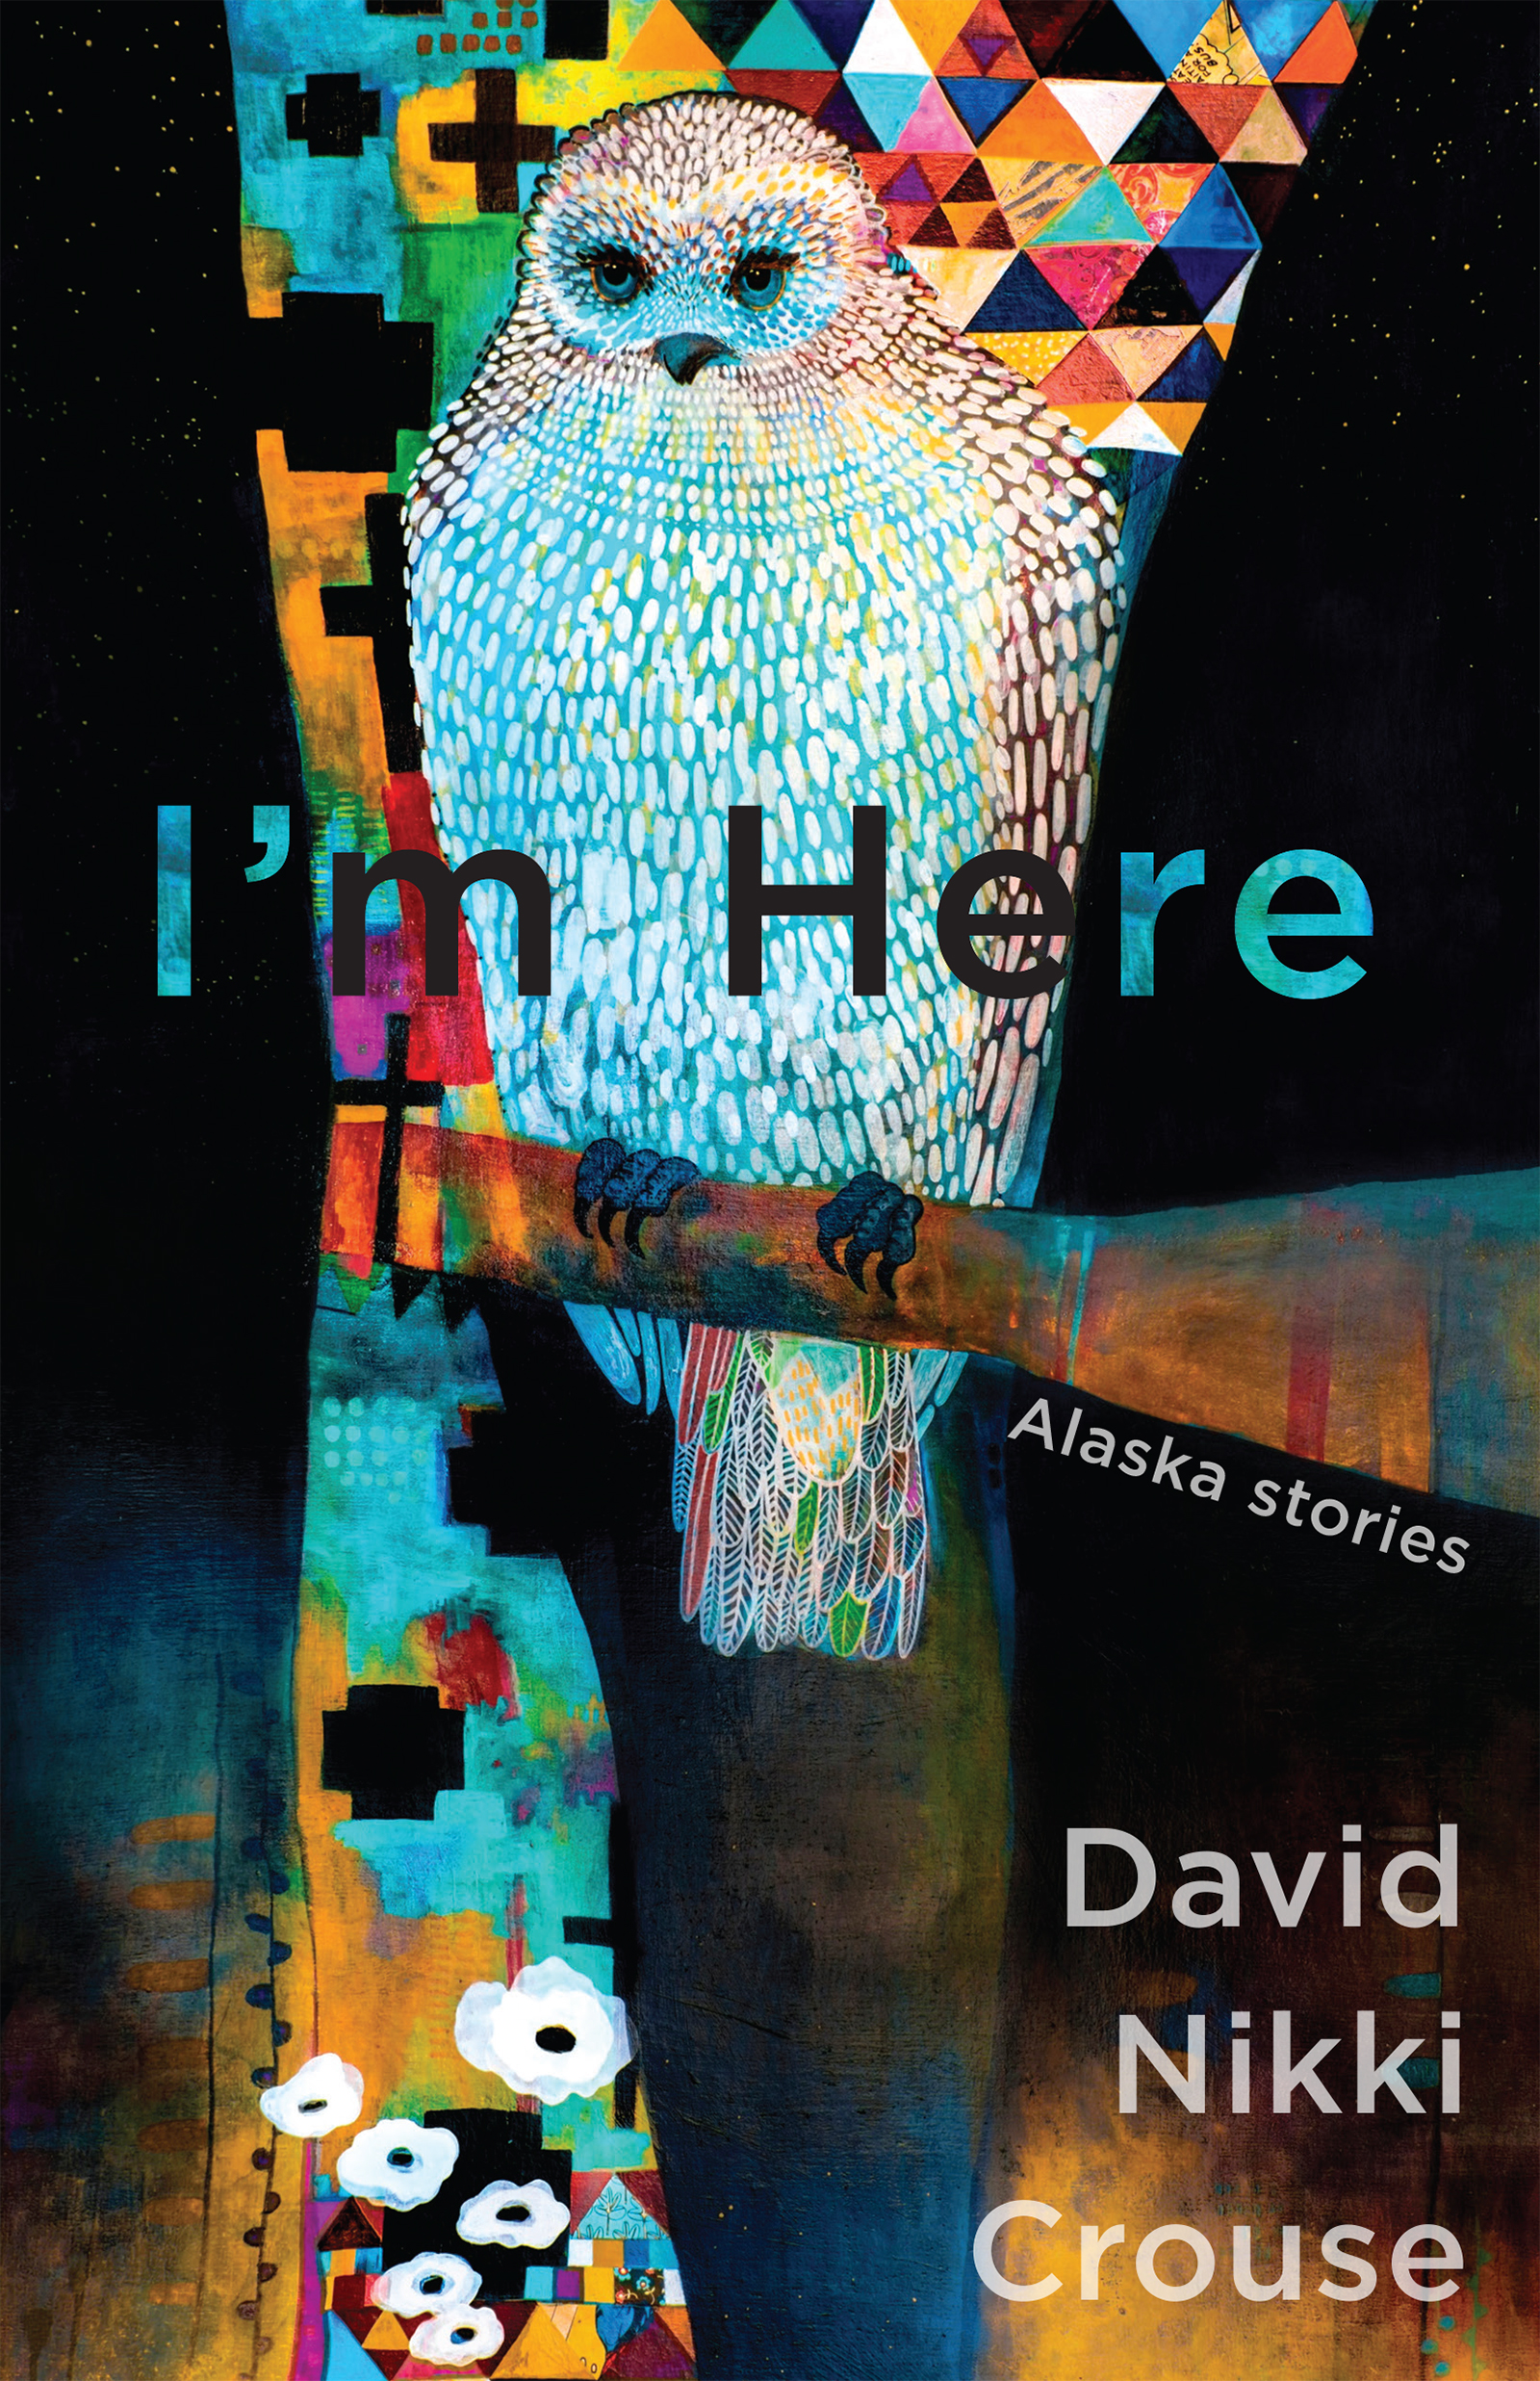 Artwork by Madara Masonn featuring a brightly colored geometric background and an image of an owl in the same color palette, with the words "I'm Here: Alaska Stories by David Nikki Crouse"